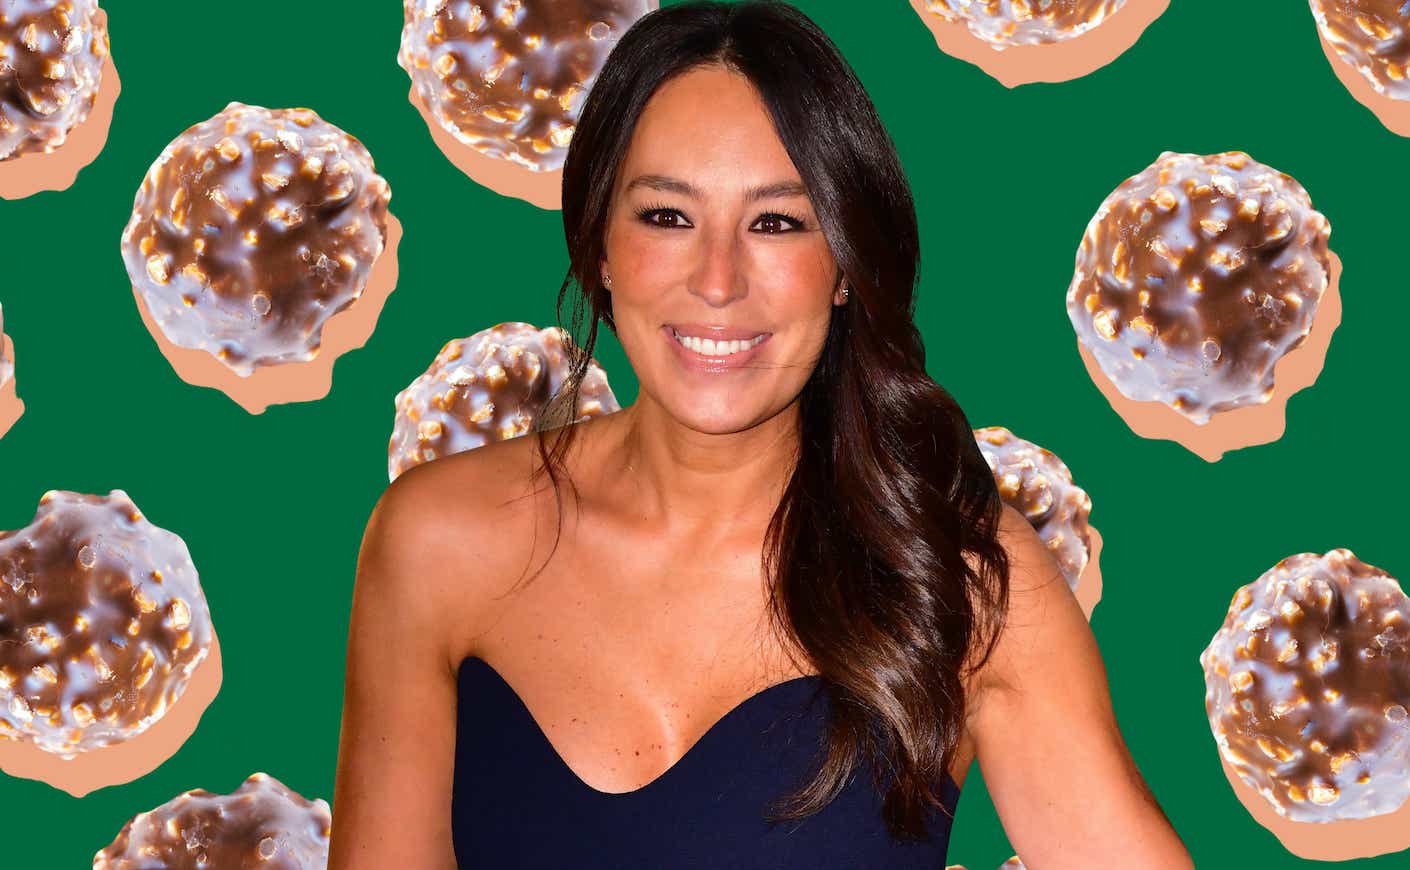 Joanna Gaines in front of peanut butter balls.